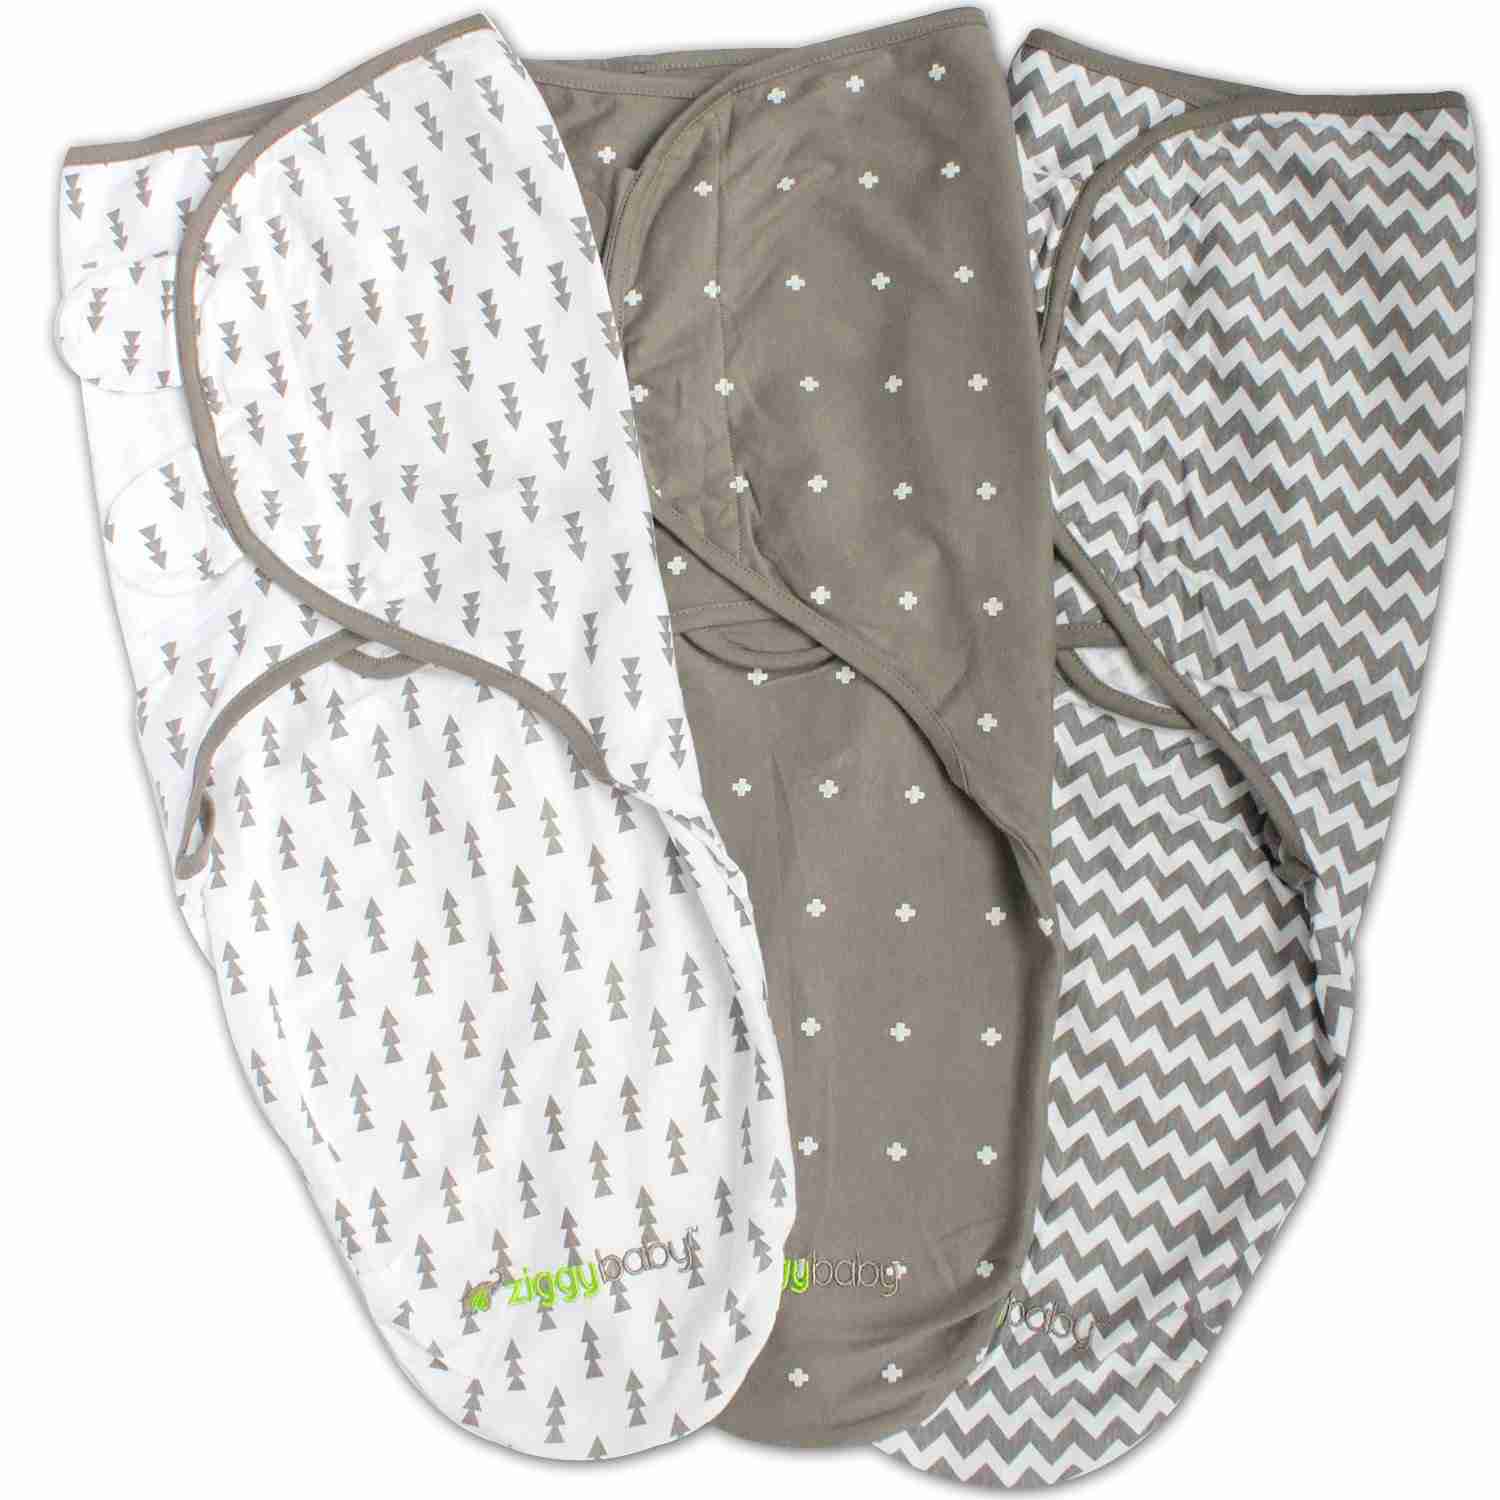 velcro-swaddle-0-3-months with cash back rebate